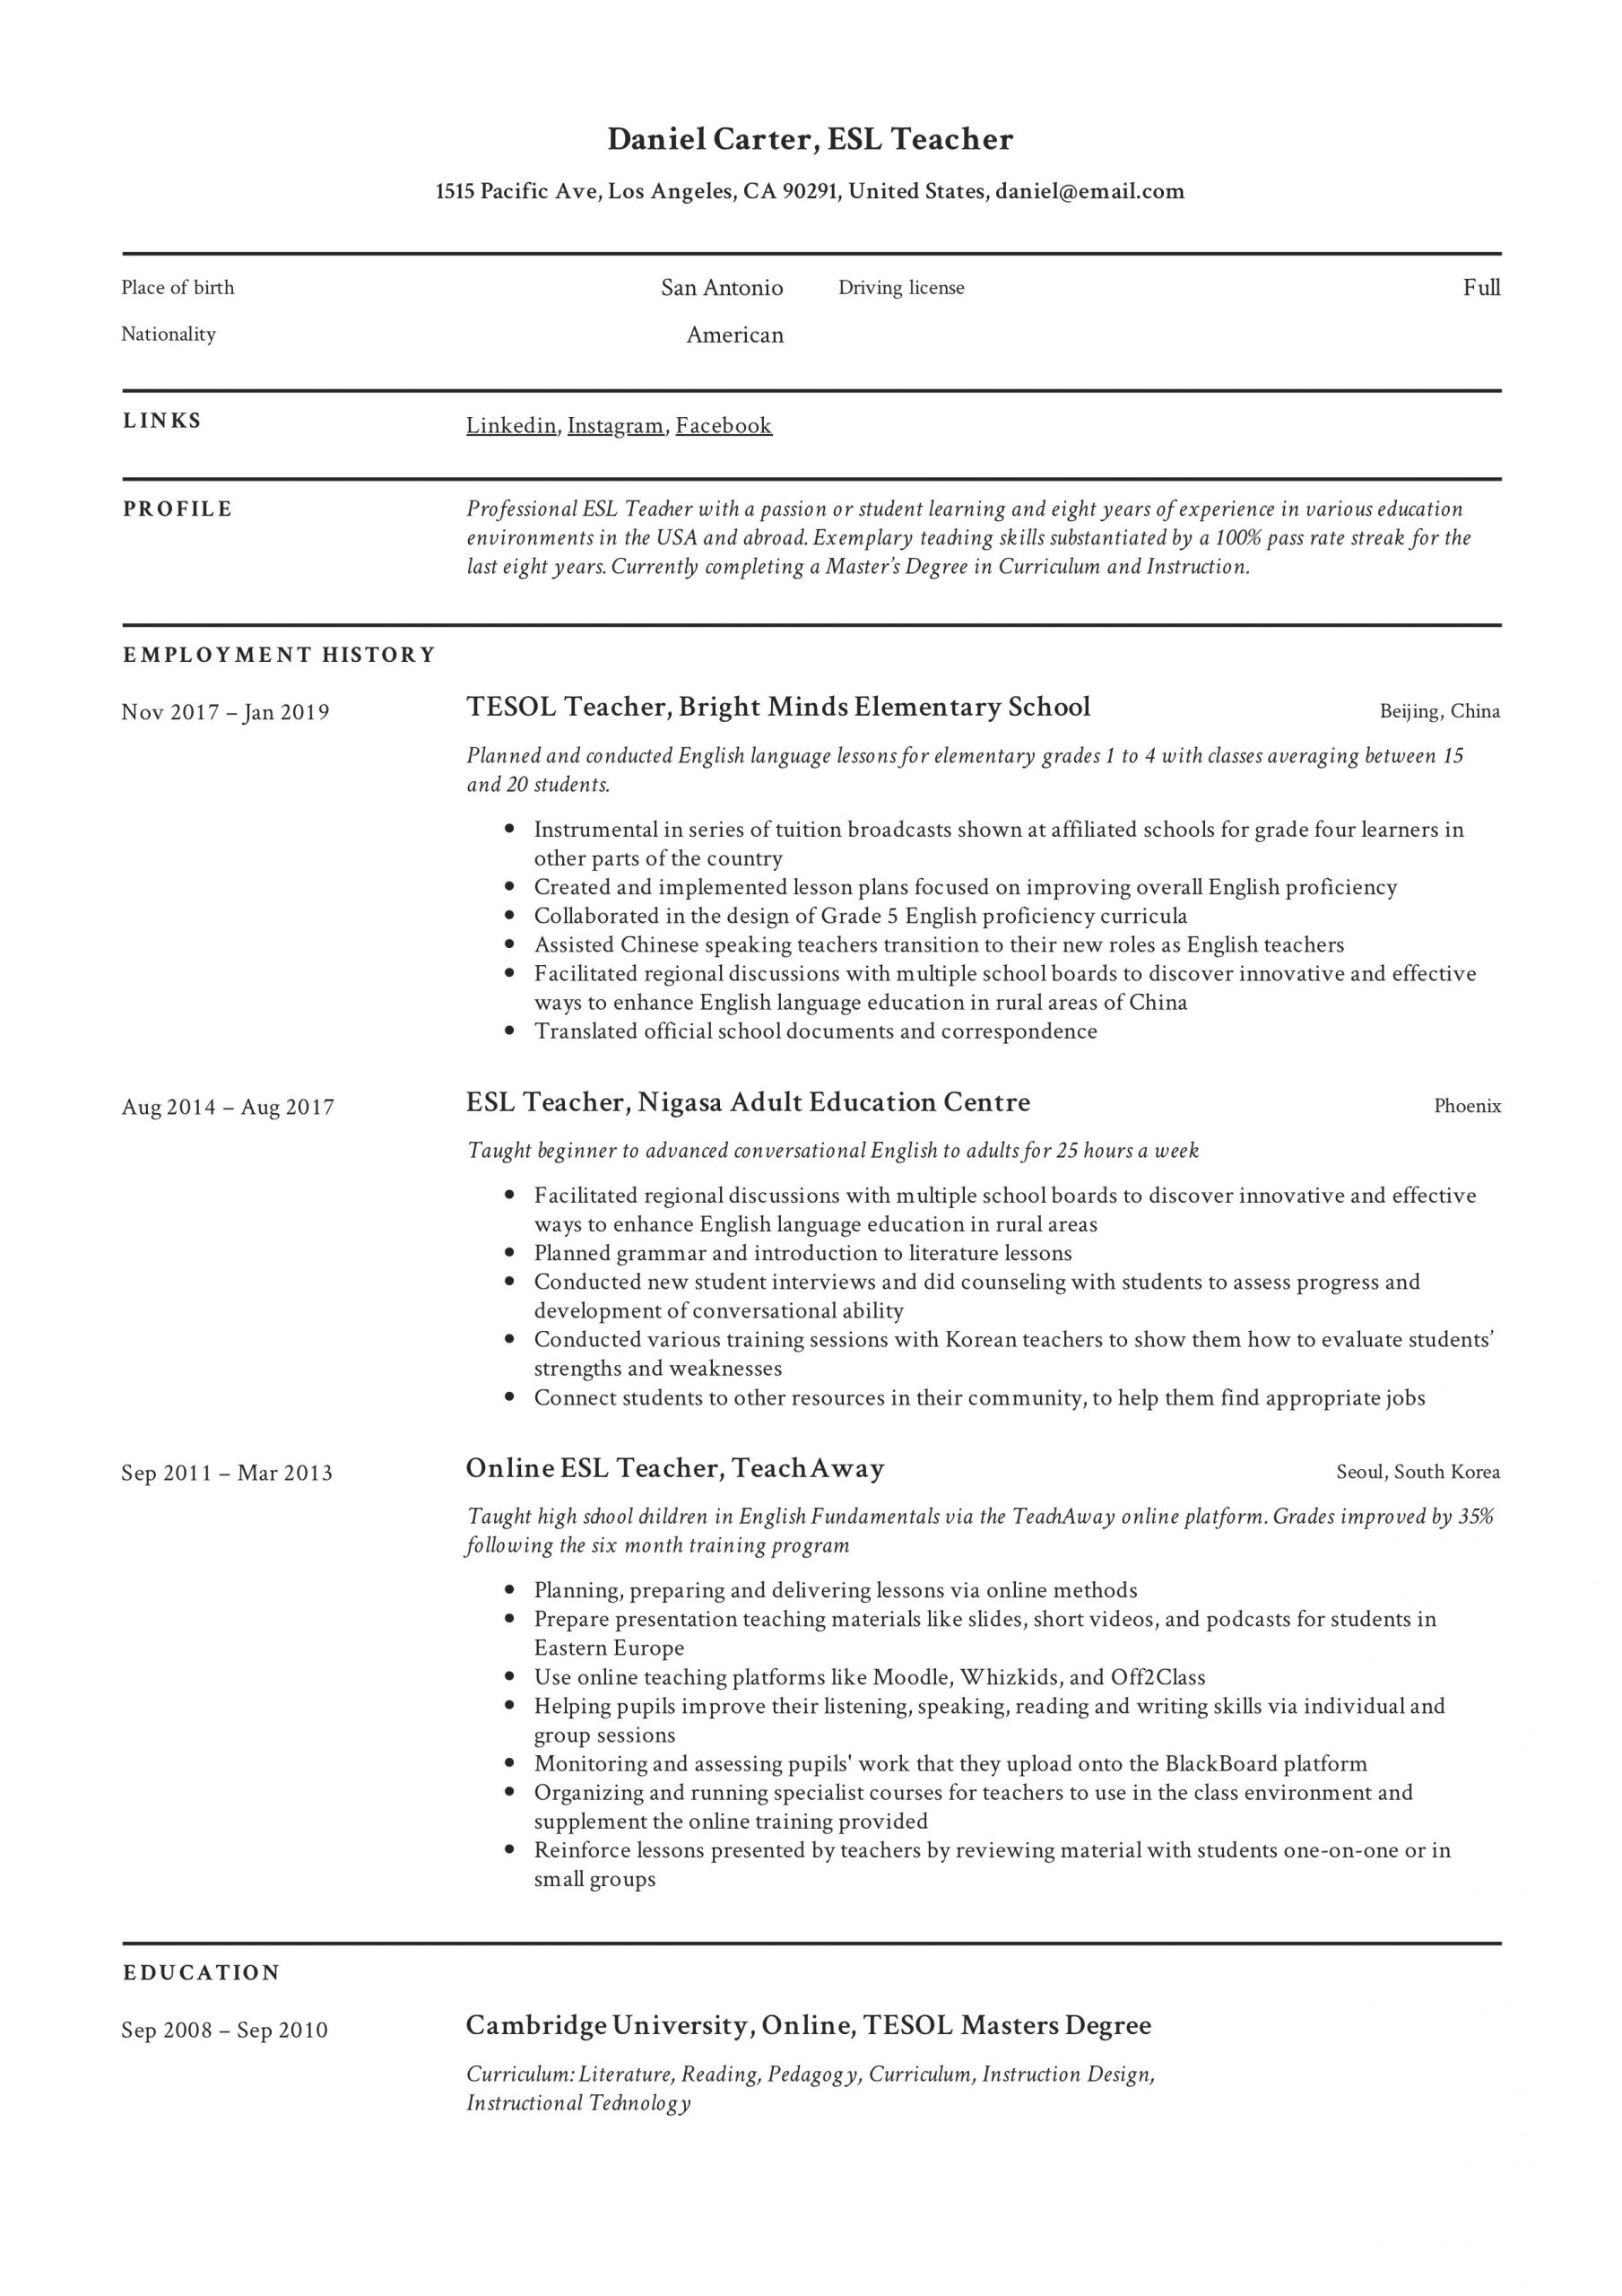 Transition Out Of Teaching Resume Samples 19 Esl Teacher Resume Examples & Writing Guide 2020